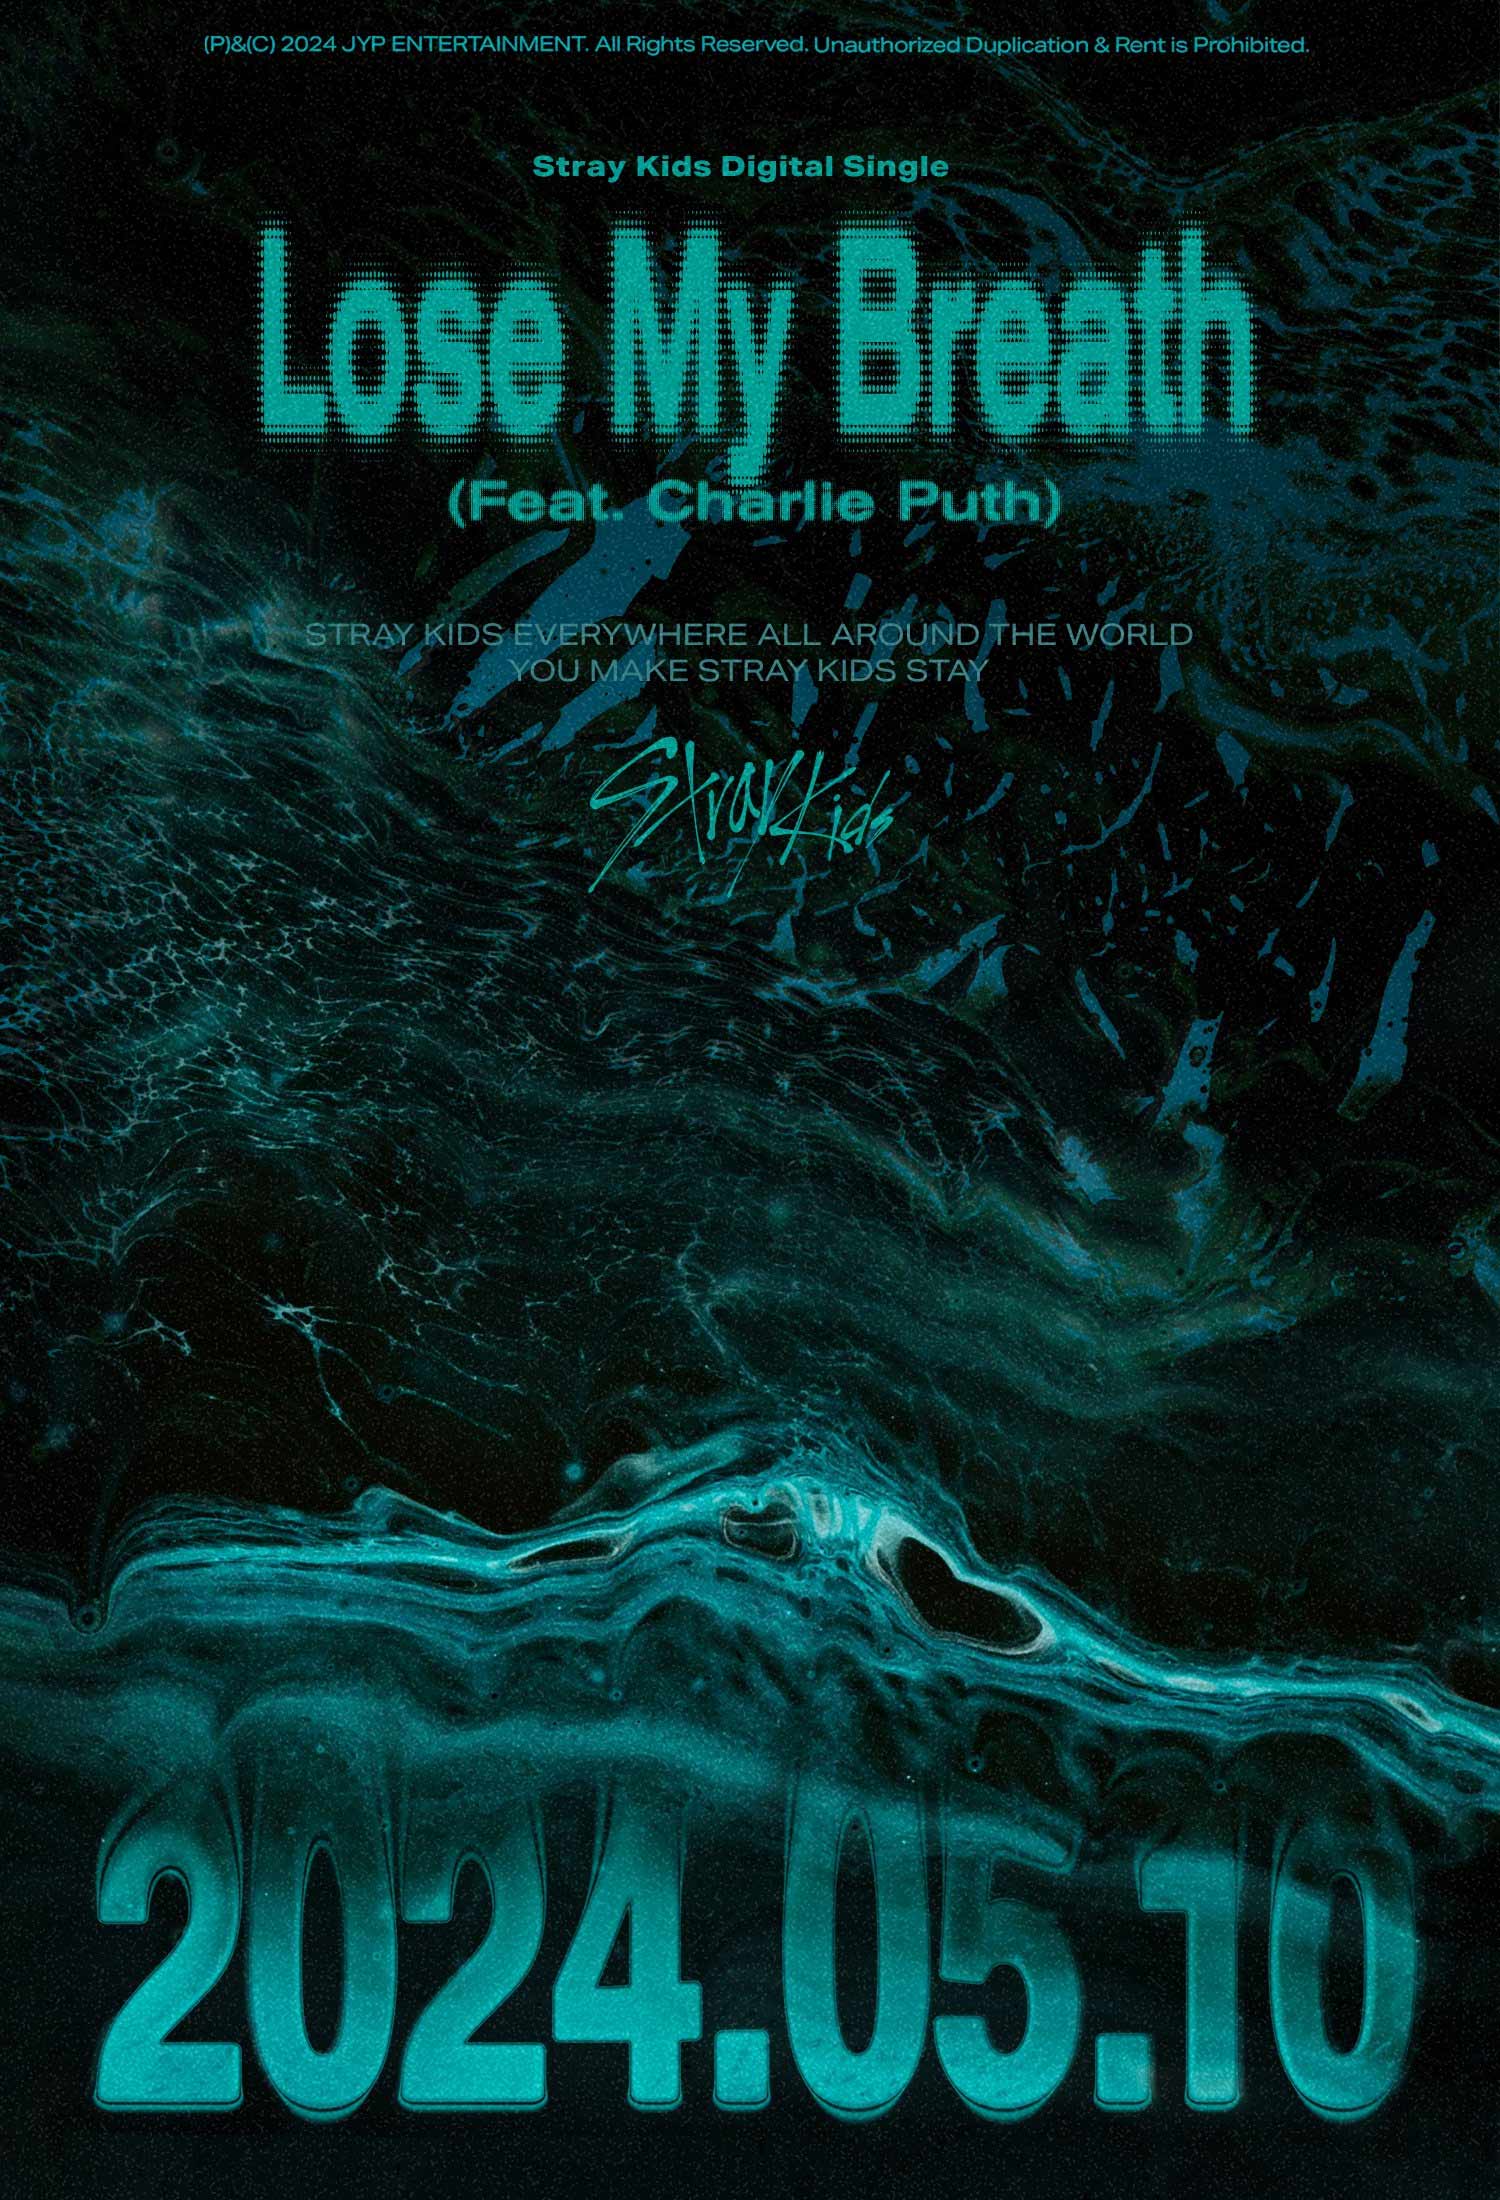 Stray Kids to release new single Lose My Breath featuring Charlie Puth